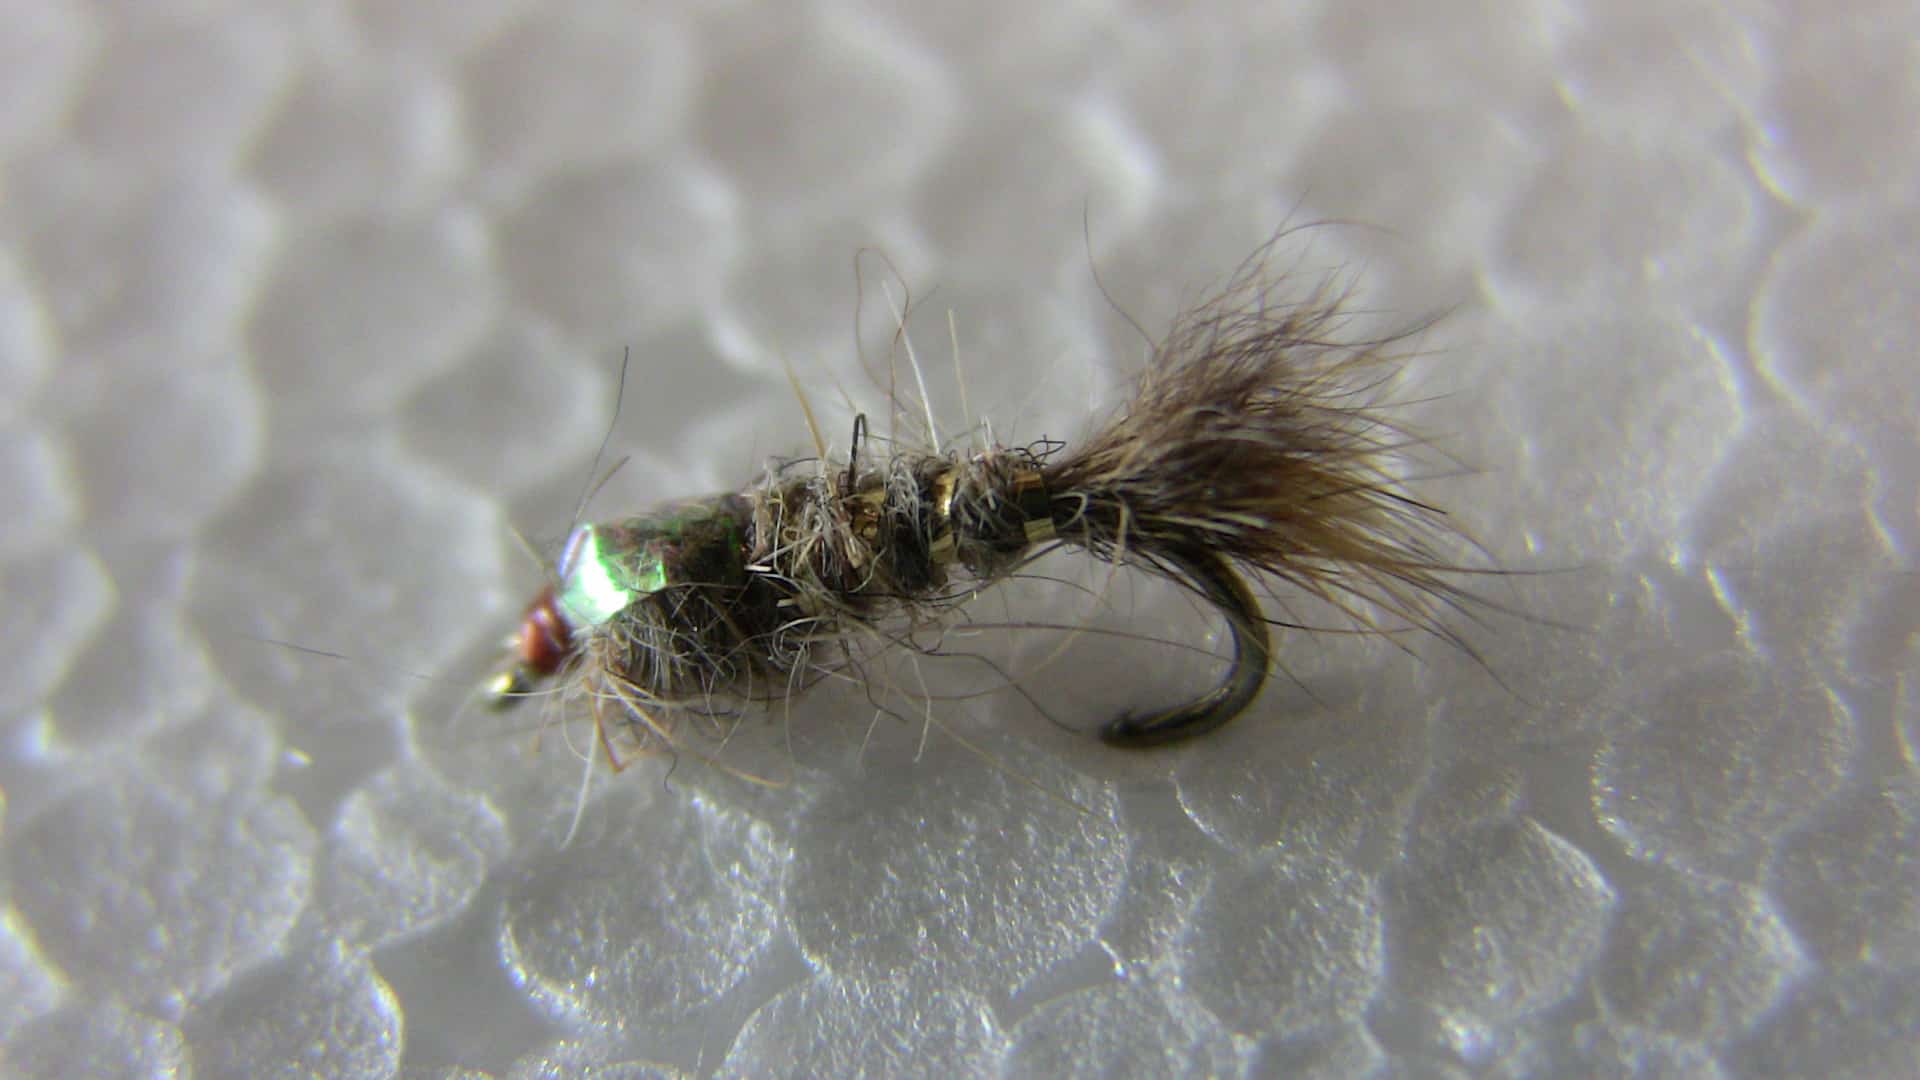 The hairs ear nymph, how to tie a hare's ear fly, how to tie a hare's ear wet fly, how to tie a hare's ear nymph fly, hare's ear fly pattern, Gold Ribbed Hare's Ear Fly Pattern